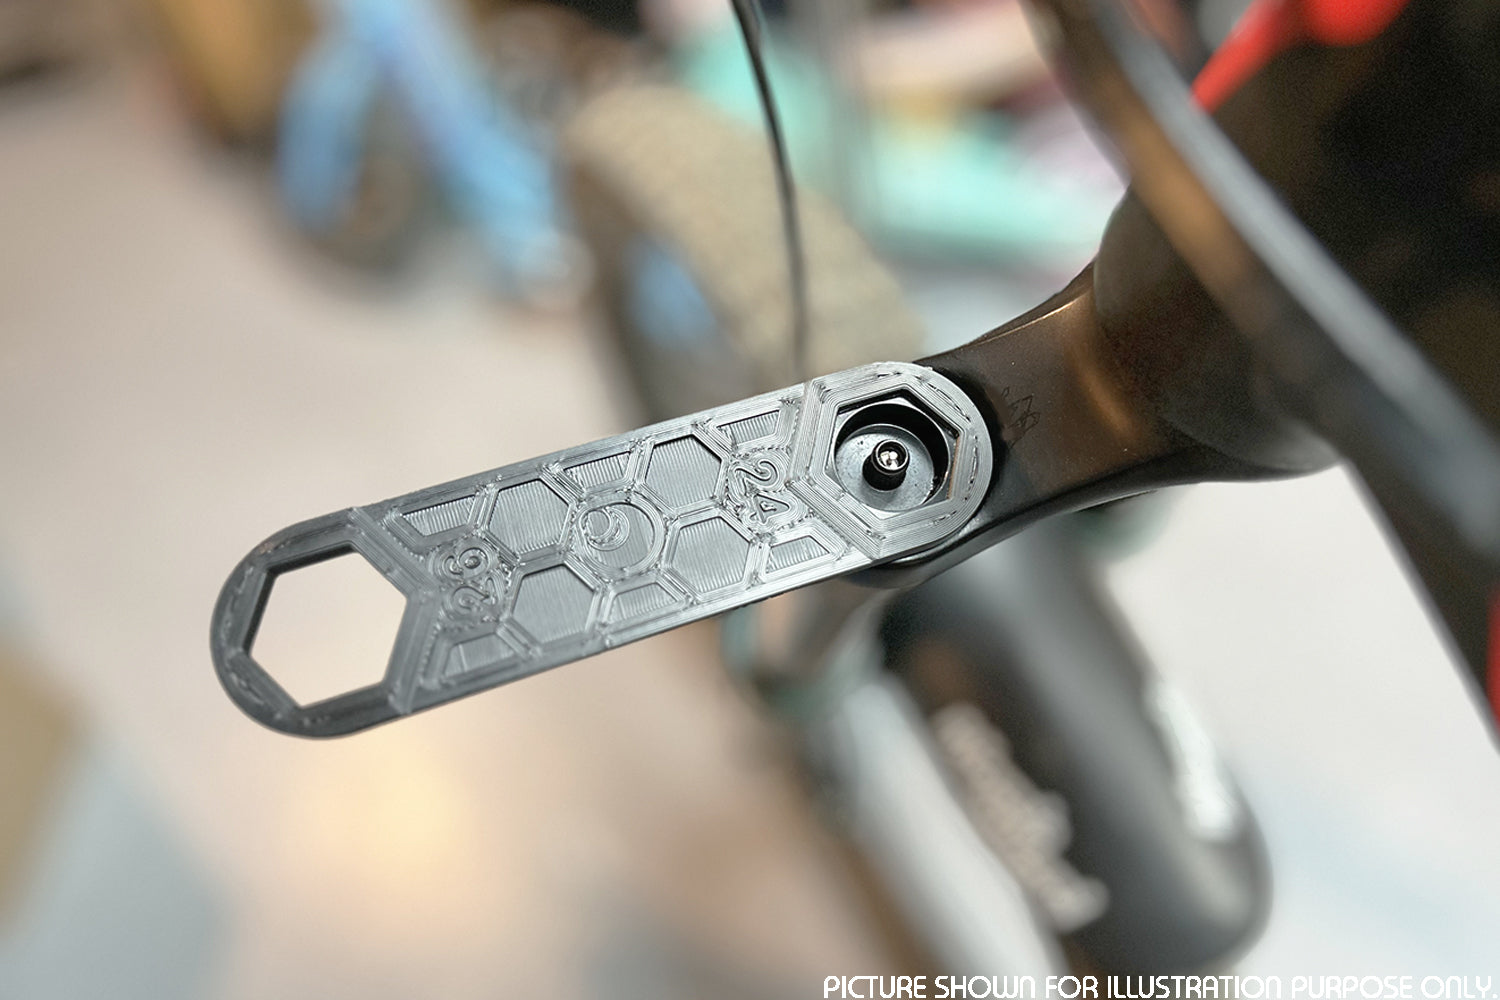 Our 3D printed 24-26mm Flat Spanners being used on a MTB suspension. A must-have for Home Mechanics!